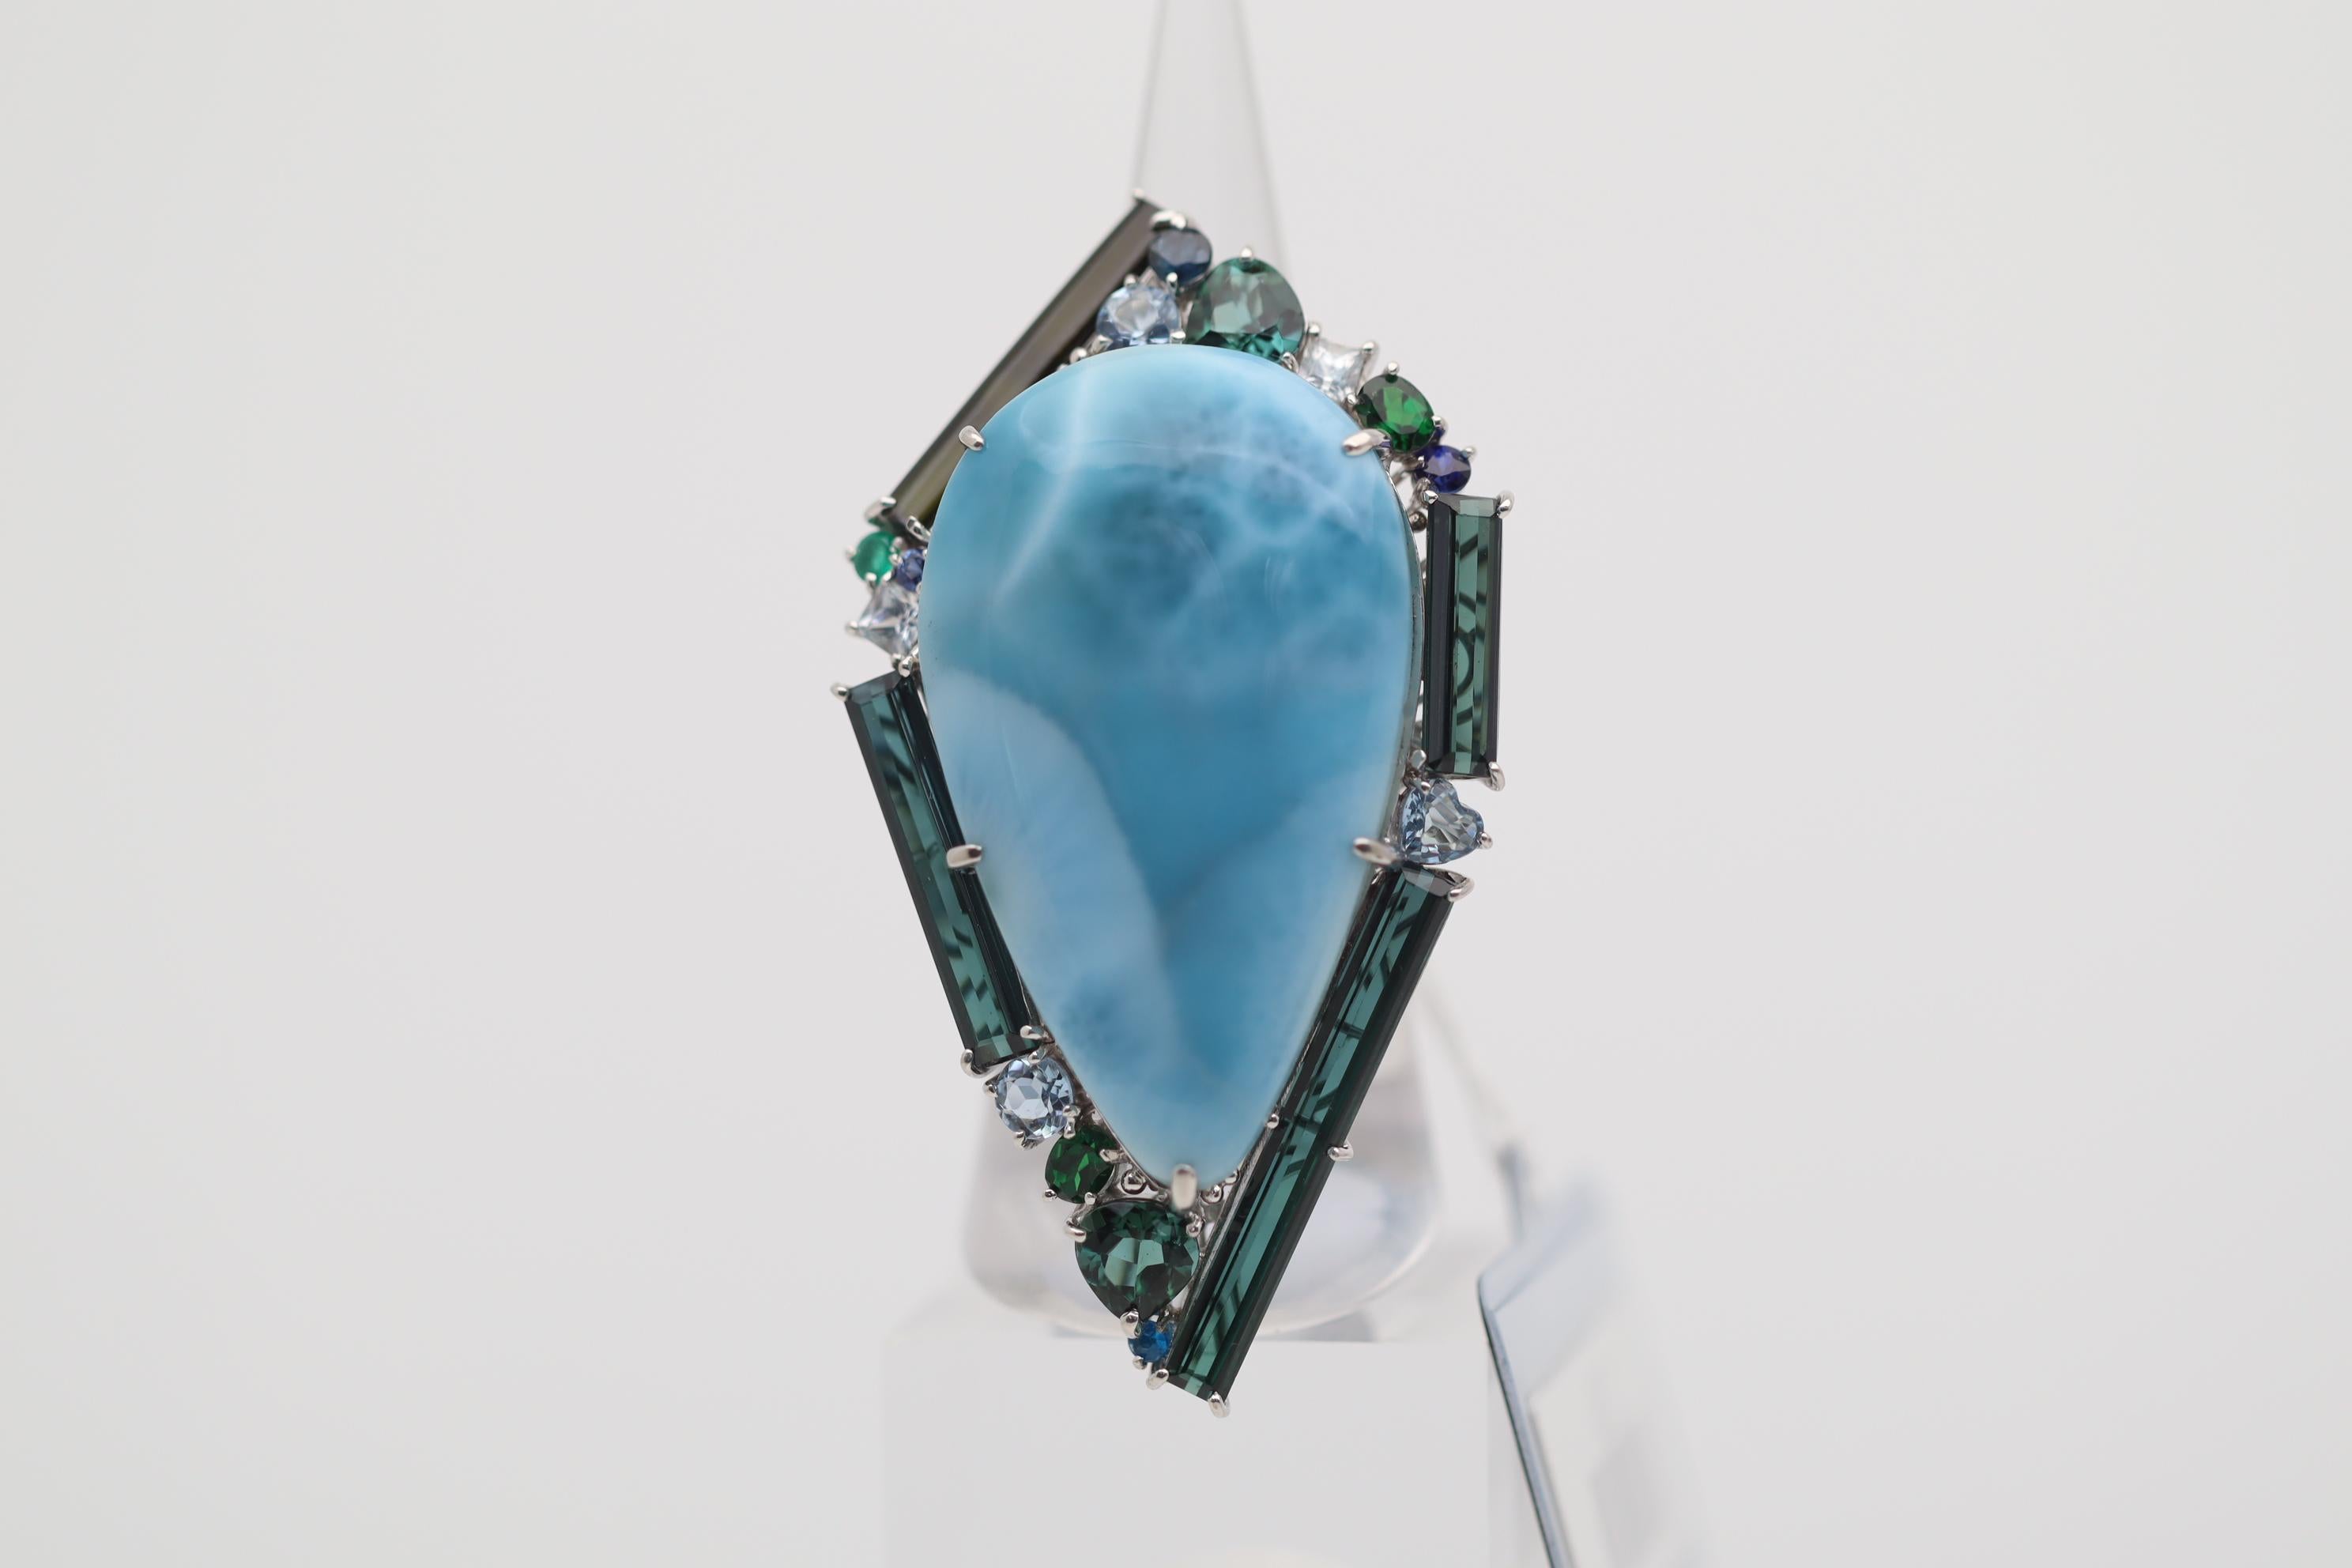 A massively impressive cocktail ring that will catch the eye of everyone in the room. This piece of art features a 46.38 carat larimar with its traditional sky blue colors and a smooth cabochon dome. It is bordered by various gemstones including